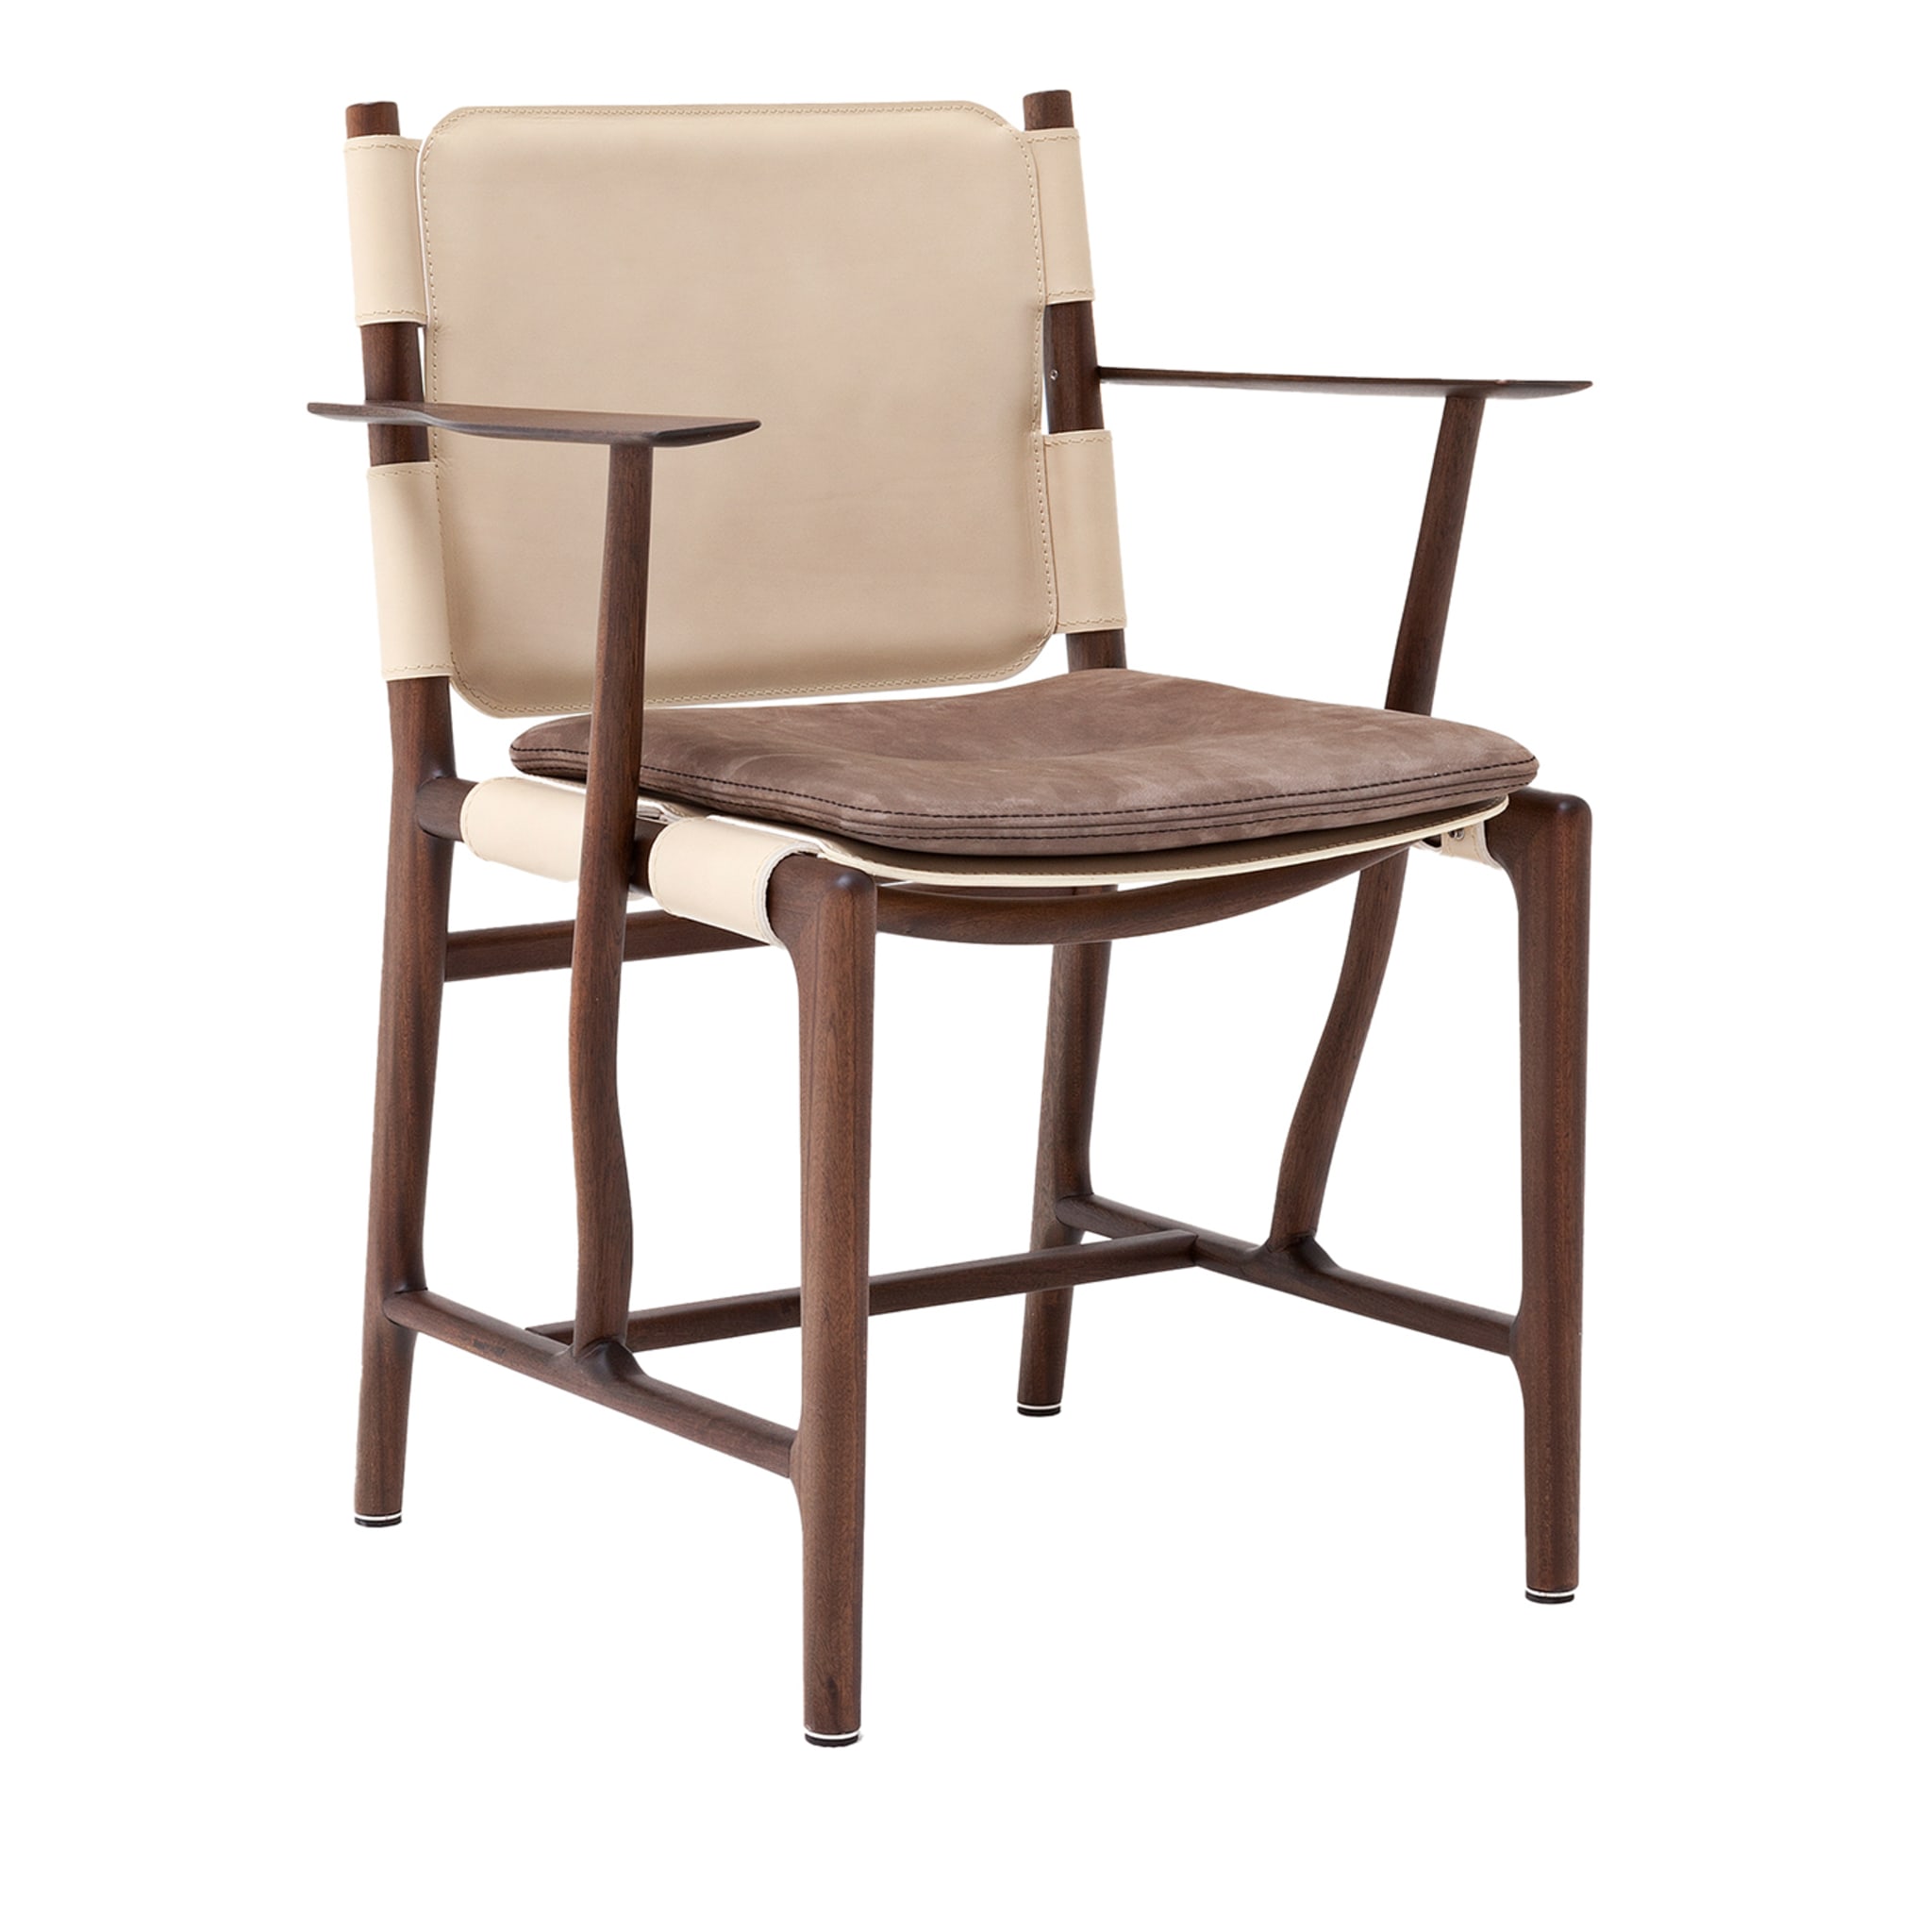 Levante Beige Chair with Armrests by Massimo Castagna - Main view